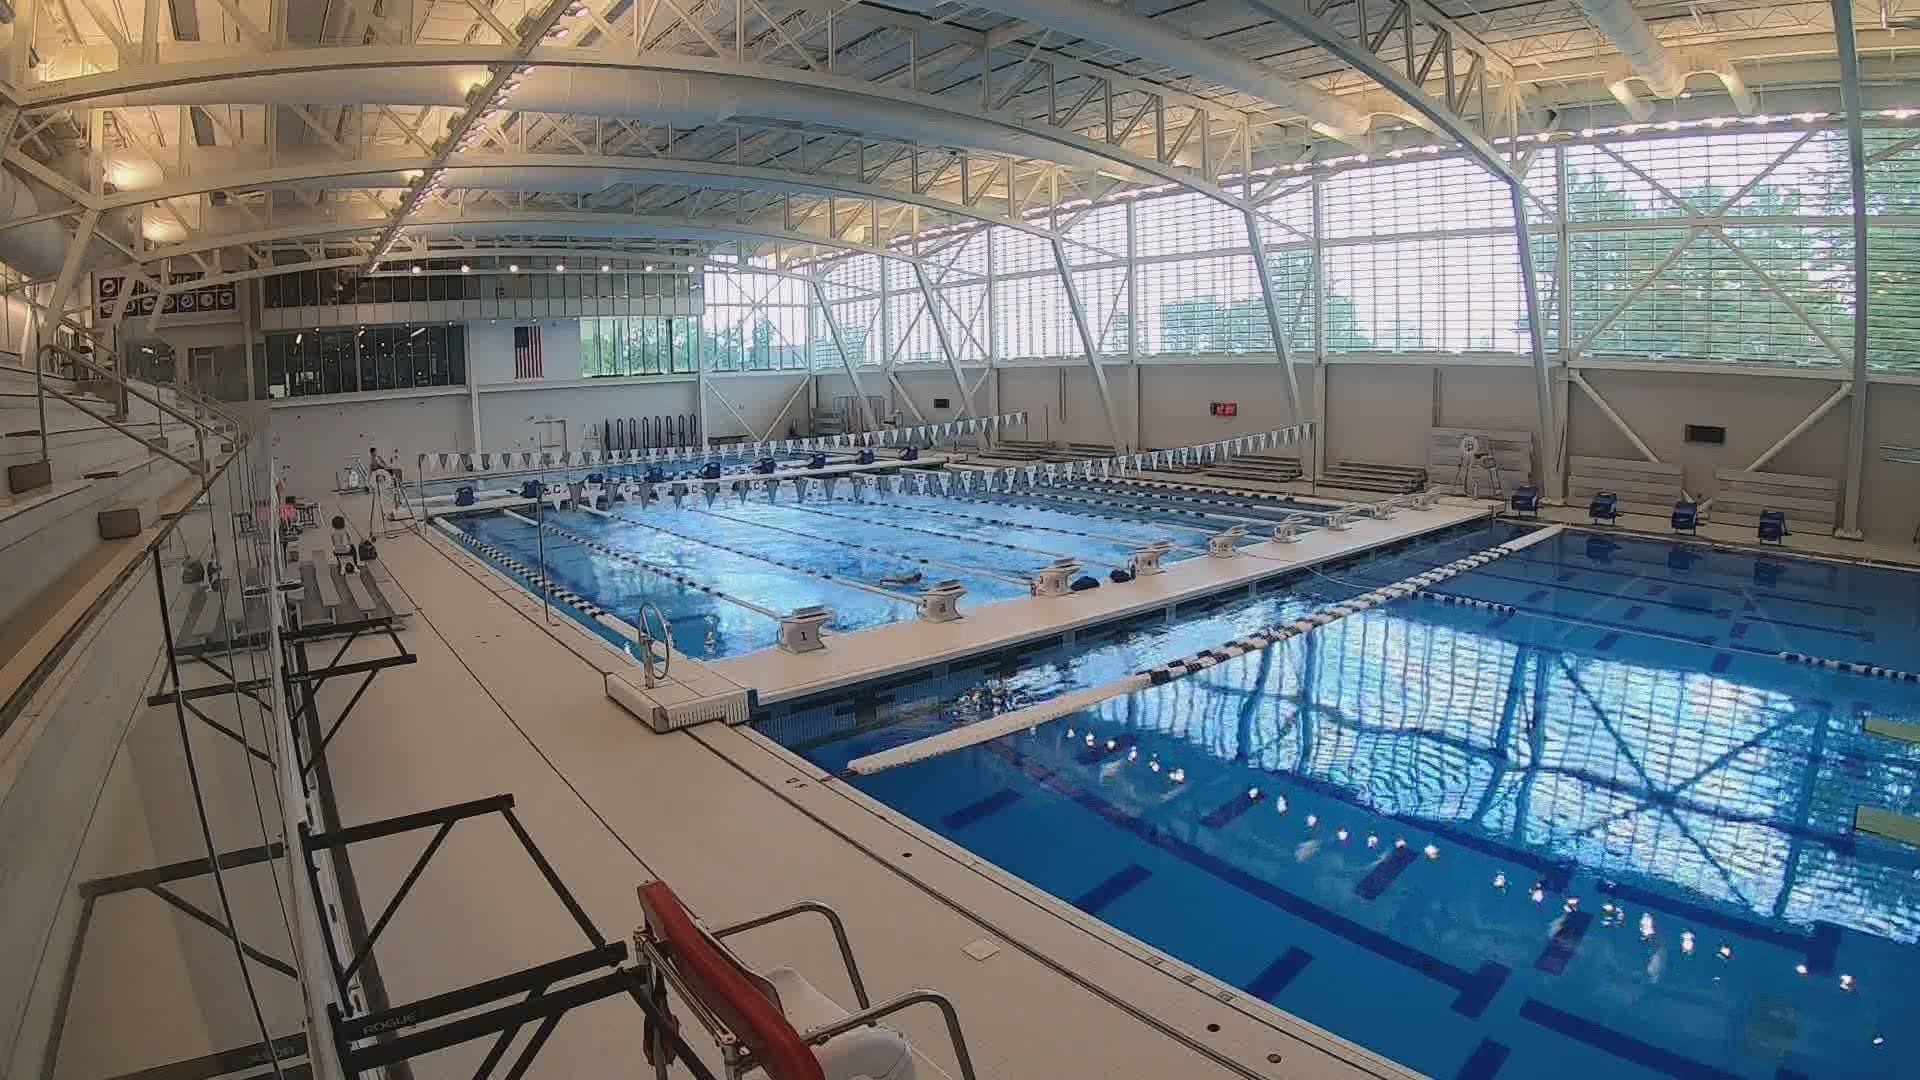 The new pool is located at Colby College, and will allow both swimmers and divers to experience a 50-meter pool, which is the standard for Olympic competitions.